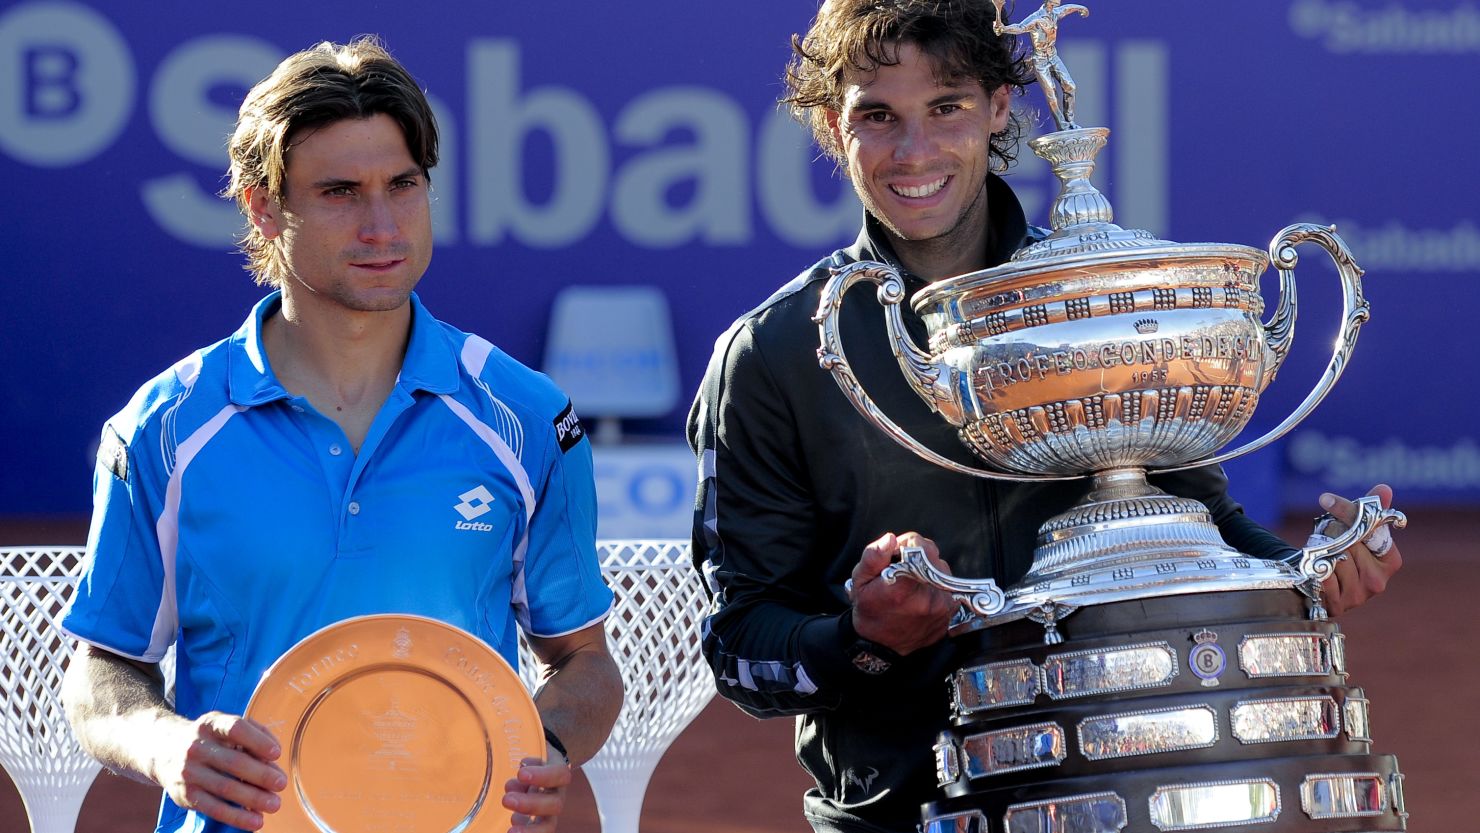 Rafael Nadal and David Ferrer played out a tight match in the final of the Barcelona Open on Sunday